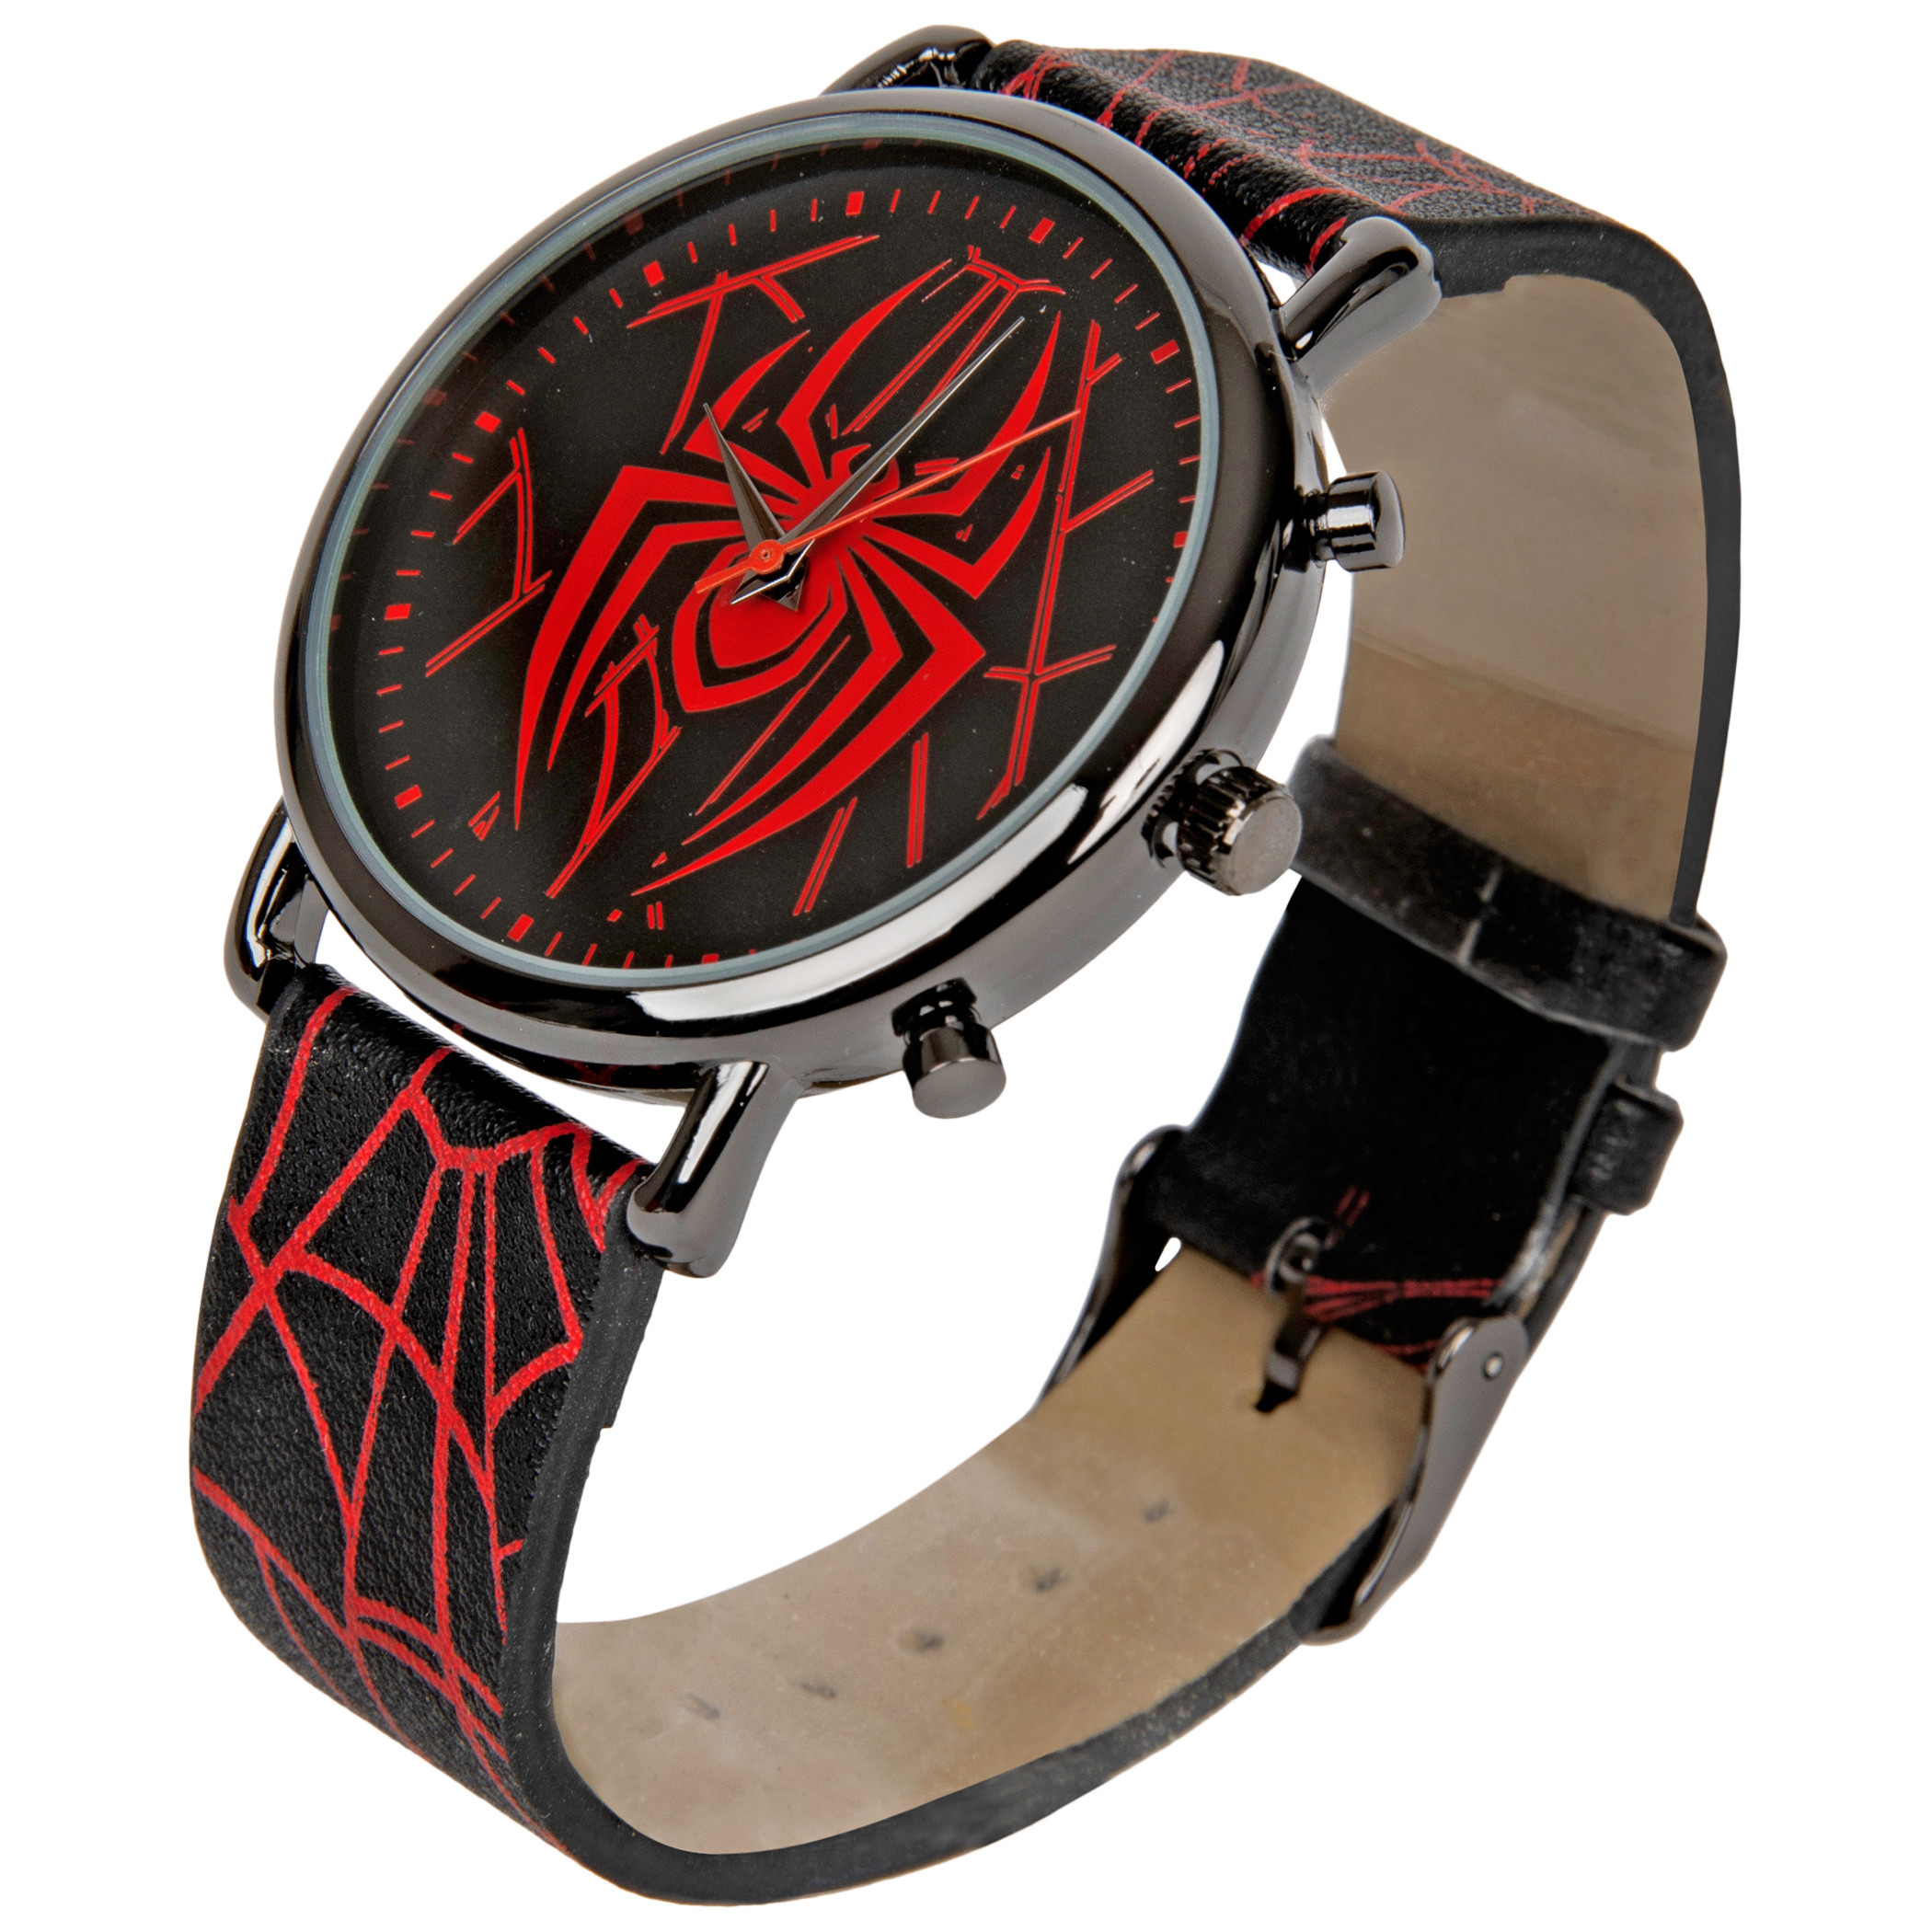 Spider-Man Symbol and Webbing Watch with Faux Leather Strap